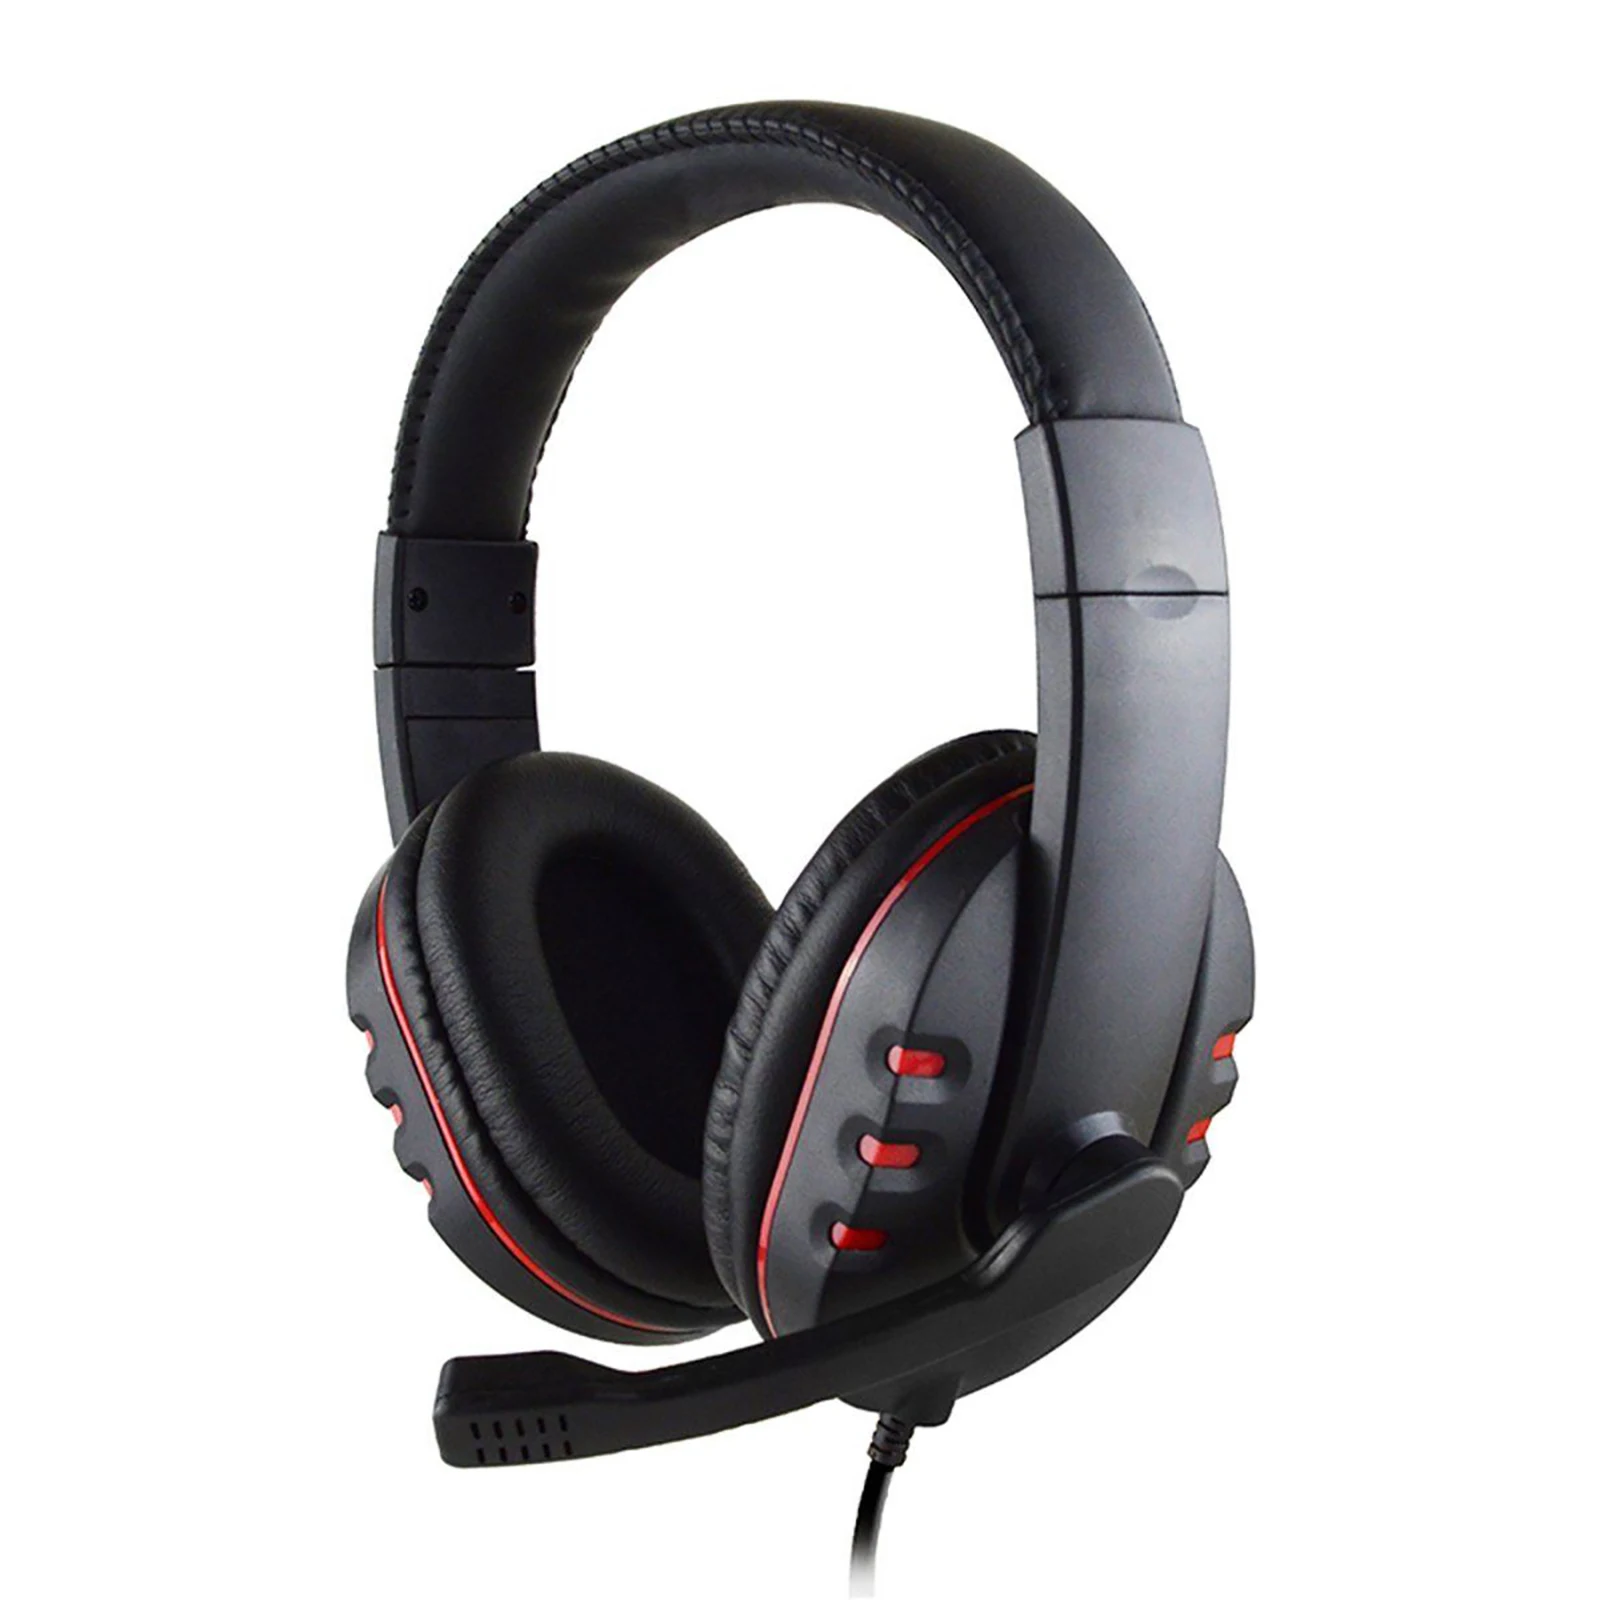 

Profession Ergonomic Gaming Headset Stereo Surround Headphone 3.5mm Wired With High Fidelity Mic For PS4 Laptop Xbox PC Xboxone